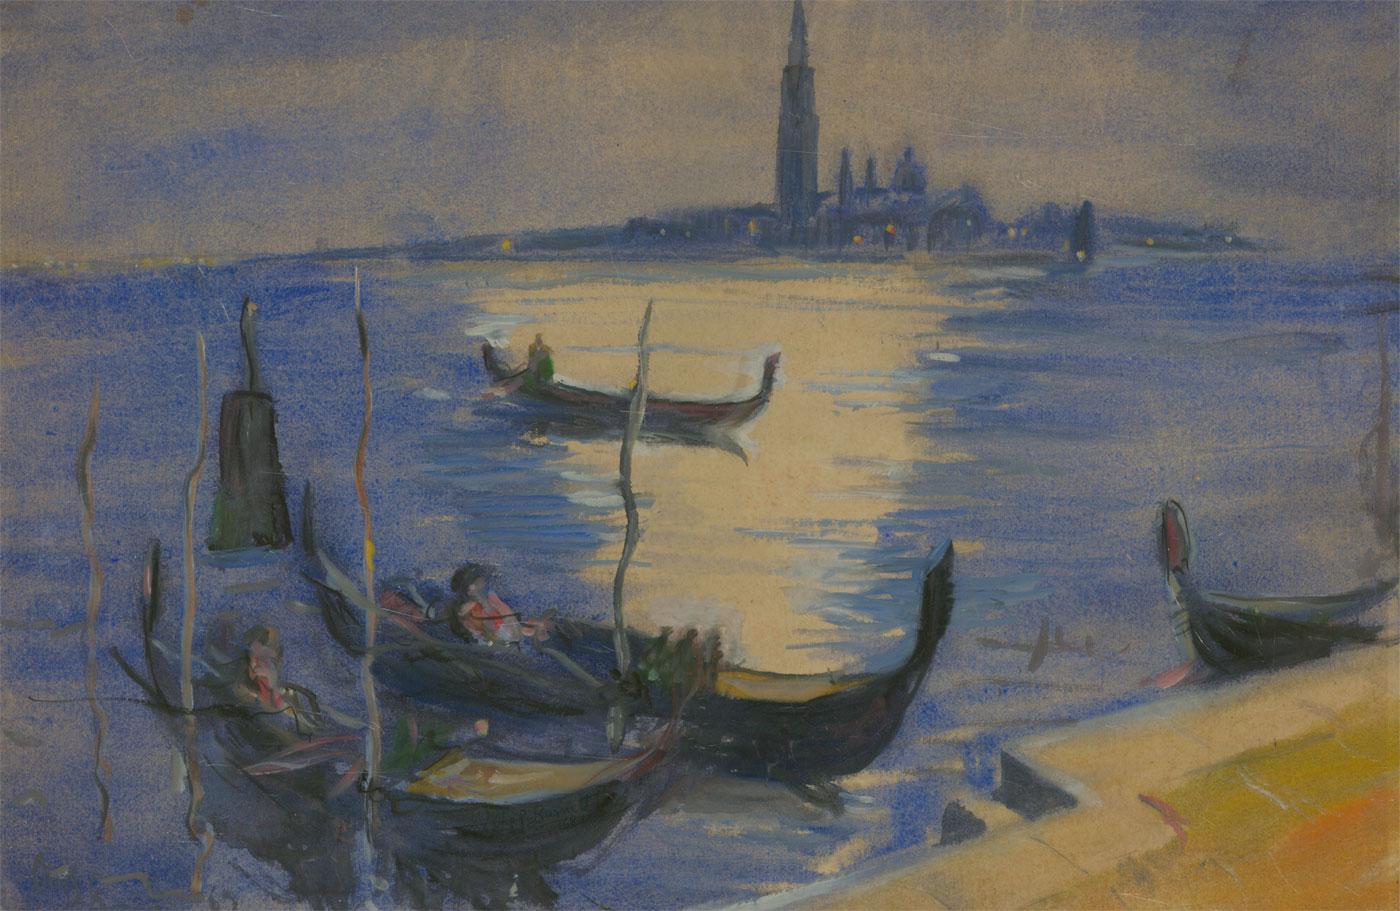 An expressive depiction of the Giudecca Canal and San Giorgio Maggiore in Venice by British artist Olaf Barnett. His additional use of gouache and pastel detail gives the composition a dramatic quality. An intense moonlight reflects off the river,